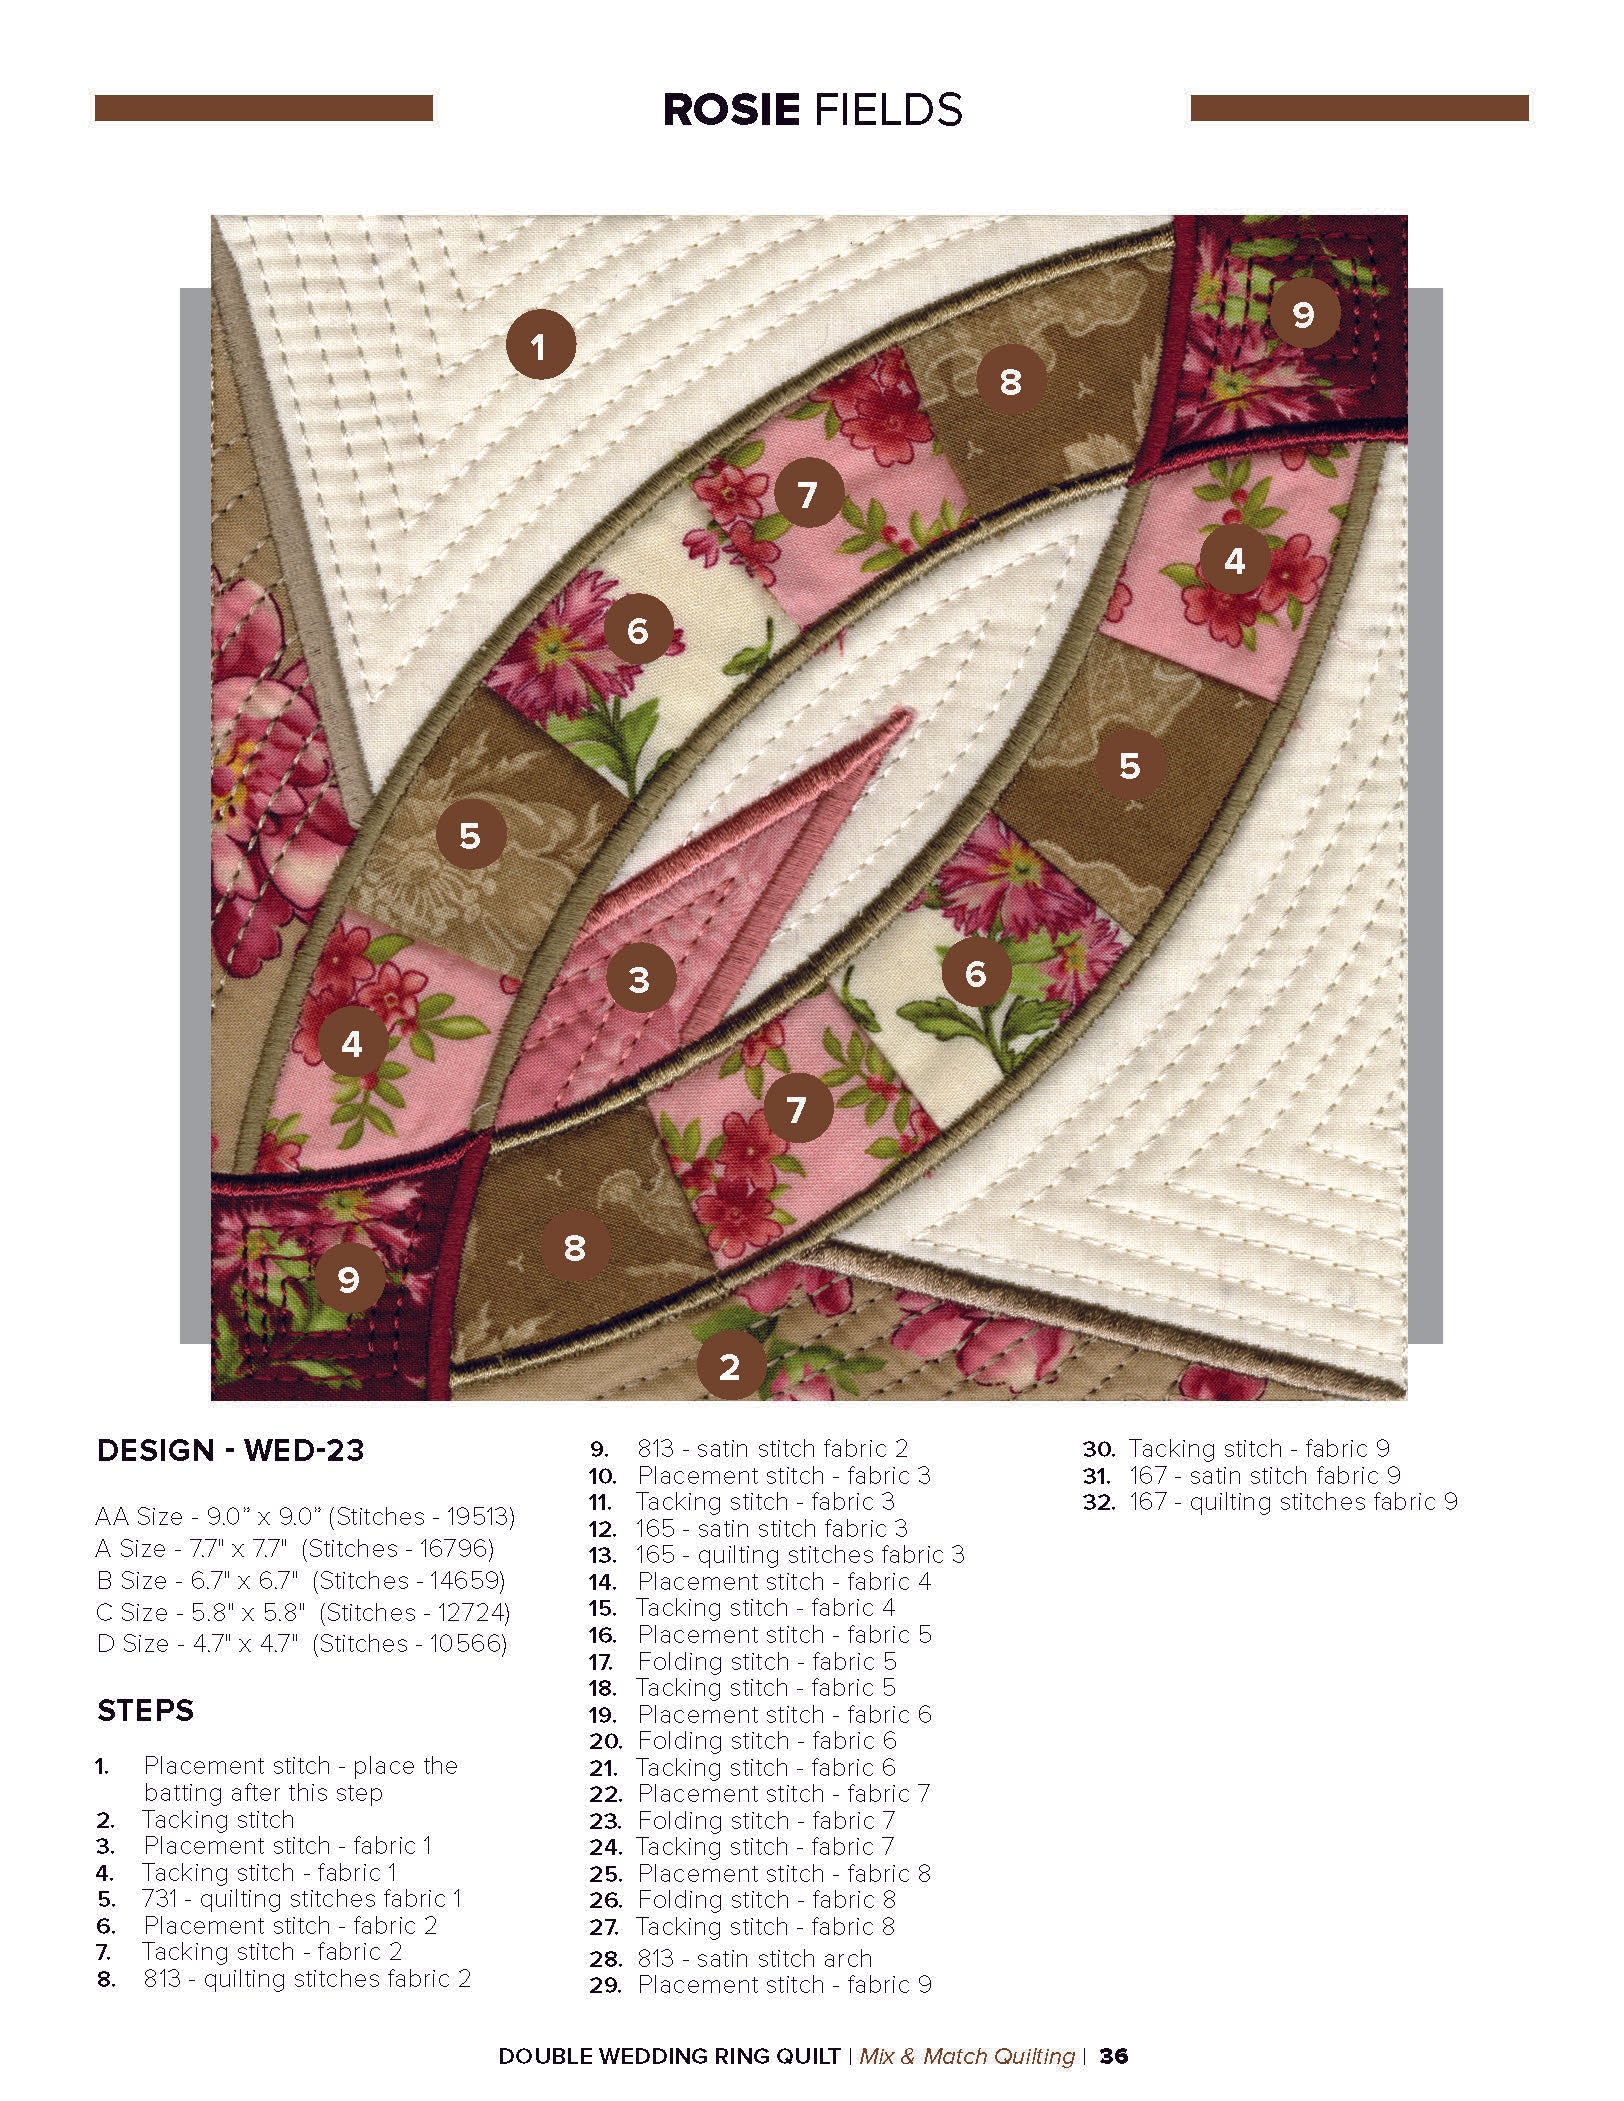 Pam's quilt. Double wedding ring quilt. DWR.  Longarm quilting designs, Double  wedding ring quilt, Quilting designs